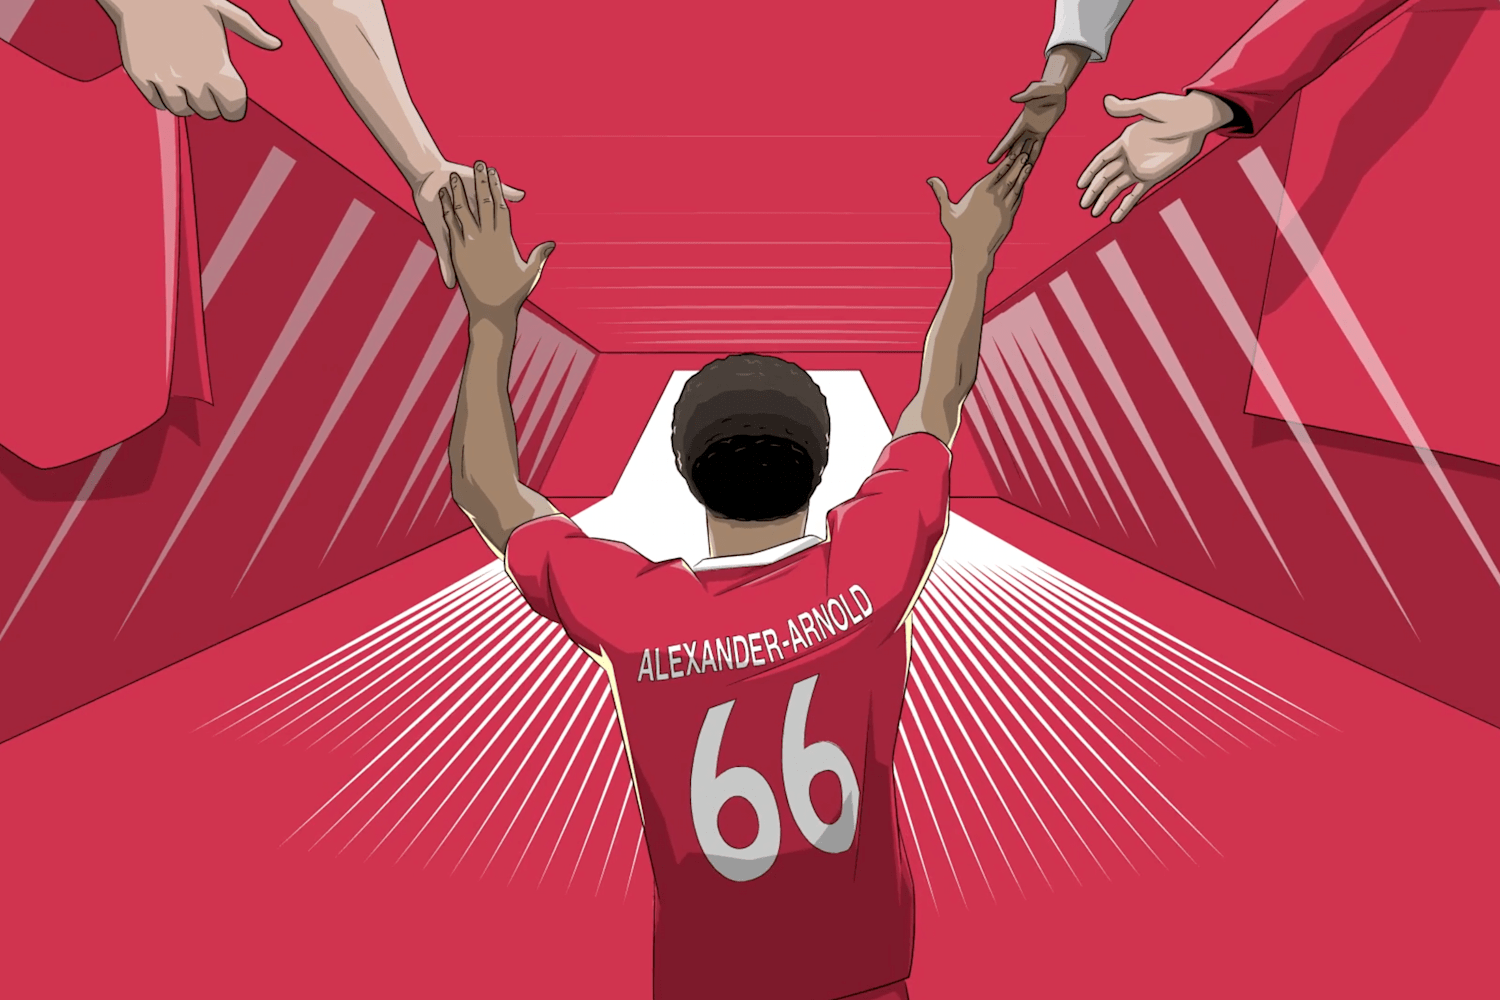 Trent Alexander-Arnold: Can't Wait To See You animation